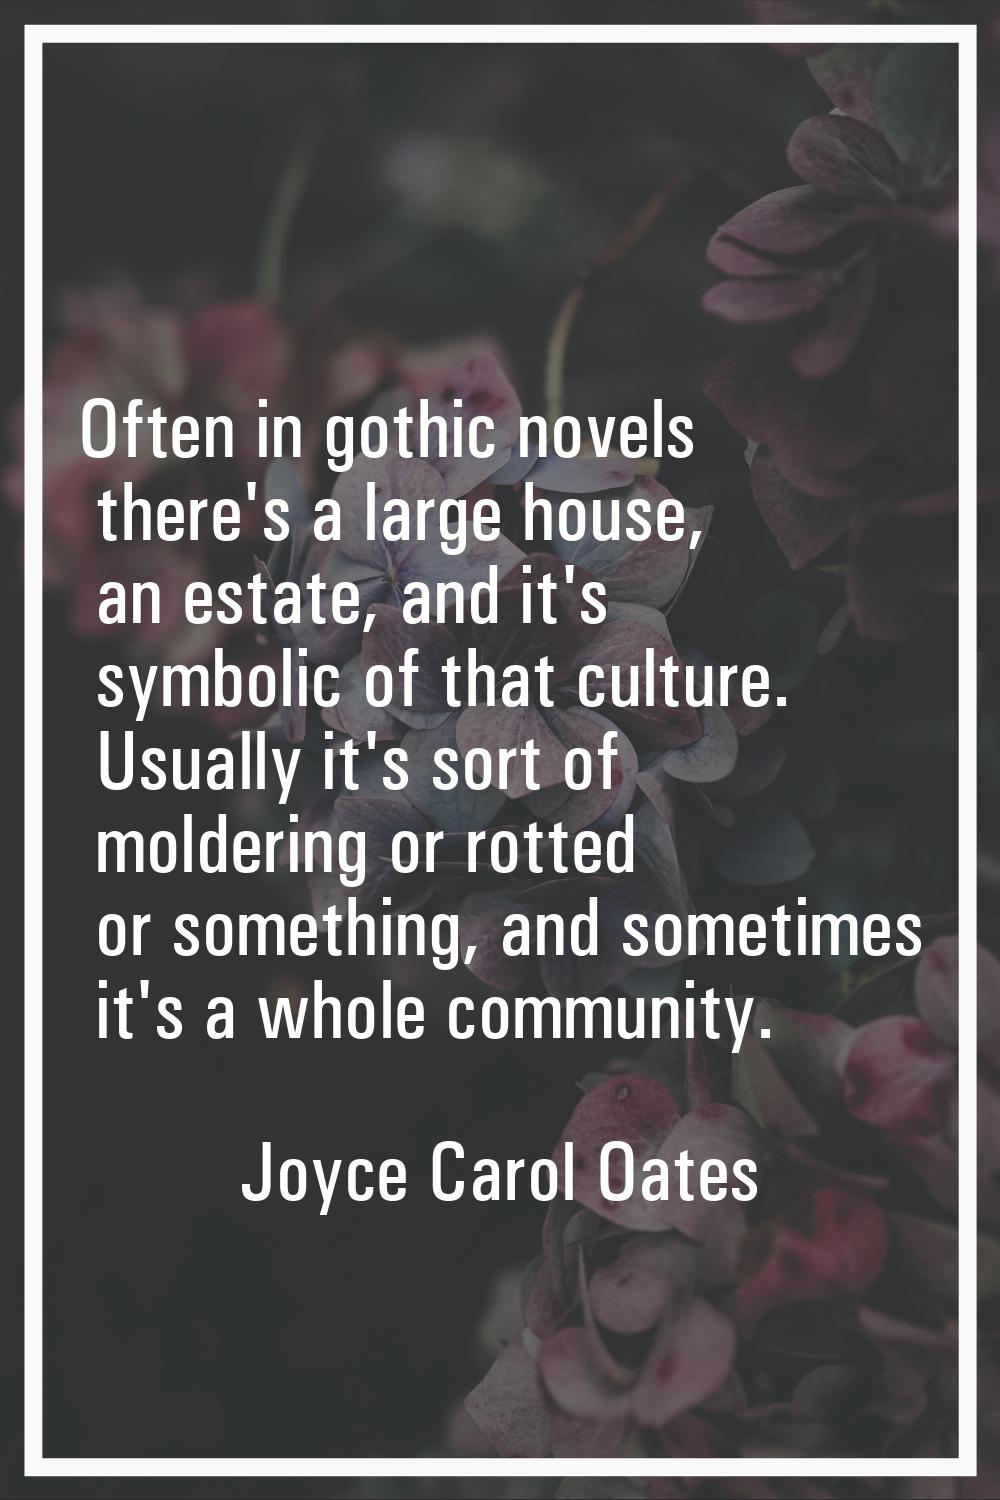 Often in gothic novels there's a large house, an estate, and it's symbolic of that culture. Usually